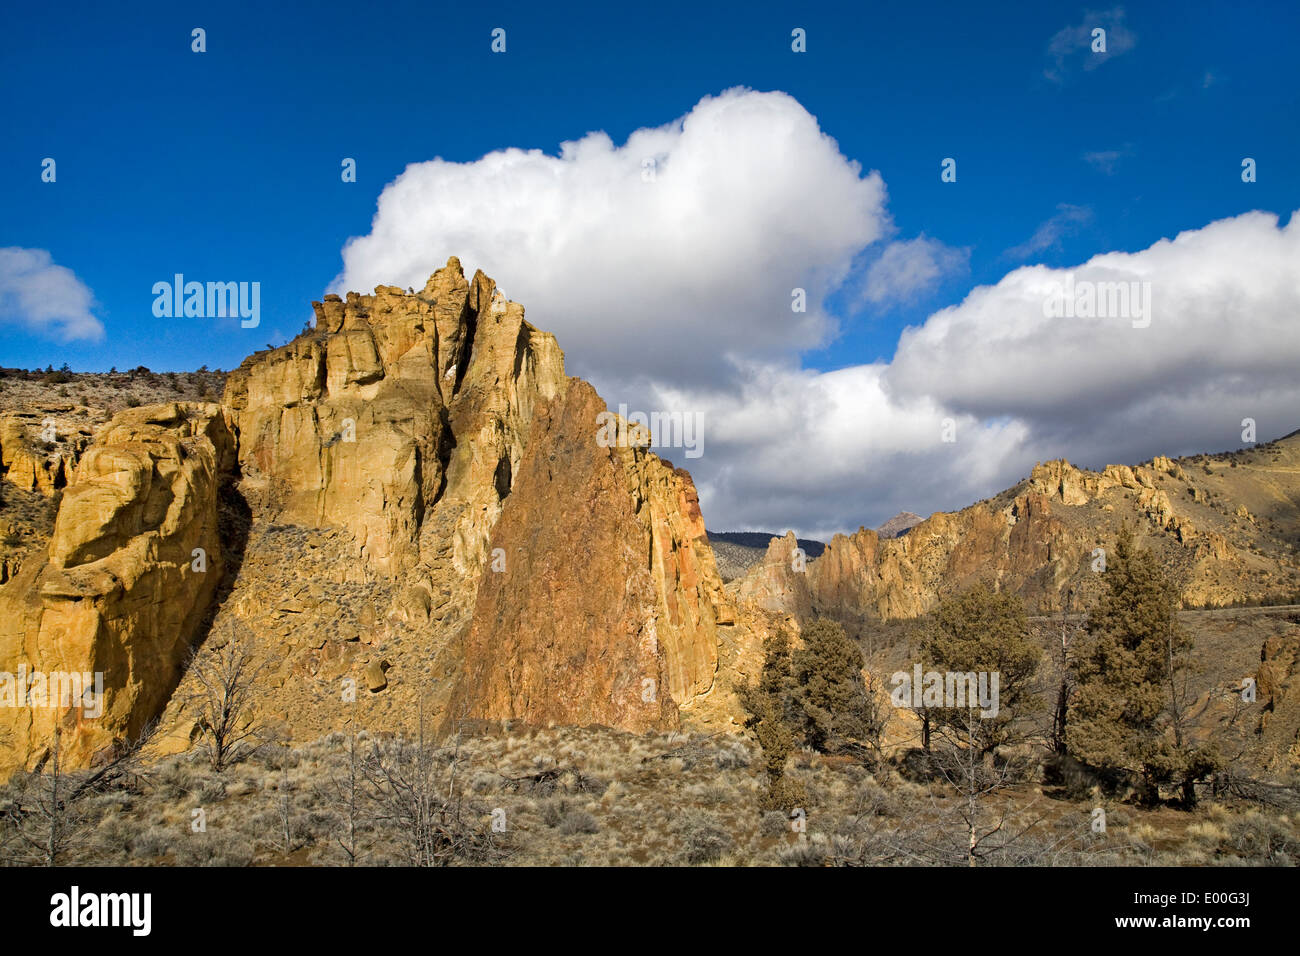 A view of the tuff cliffs at Smith Rock State Park on the Crooked River in central Oregon Stock Photo